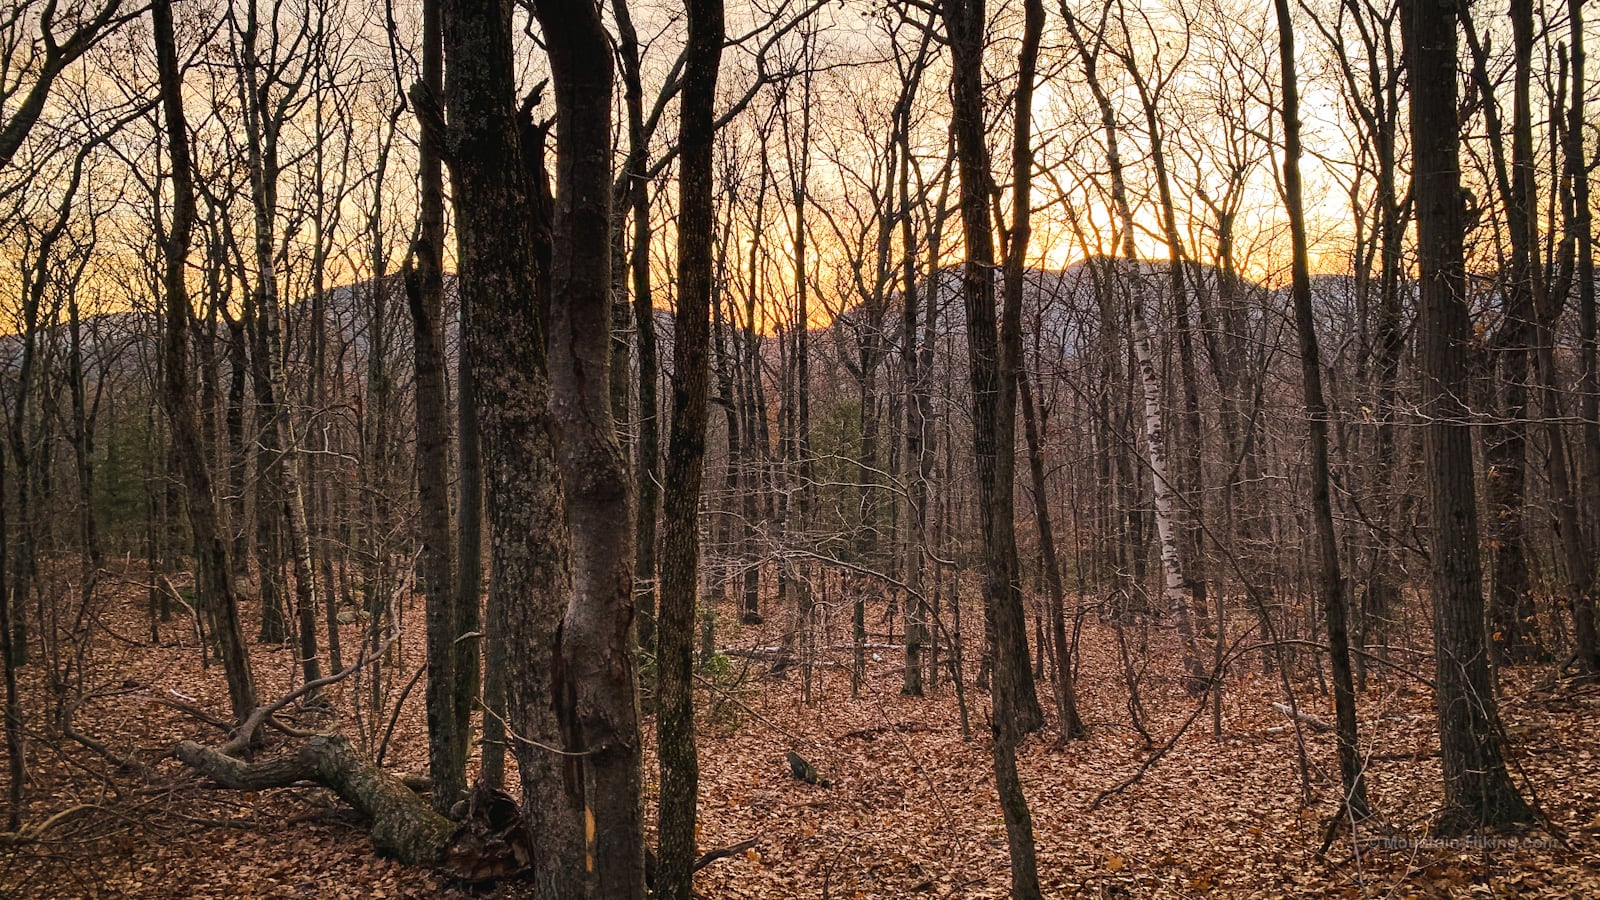 Huckleberry Point Trail: screened sundown view of mountains through trees